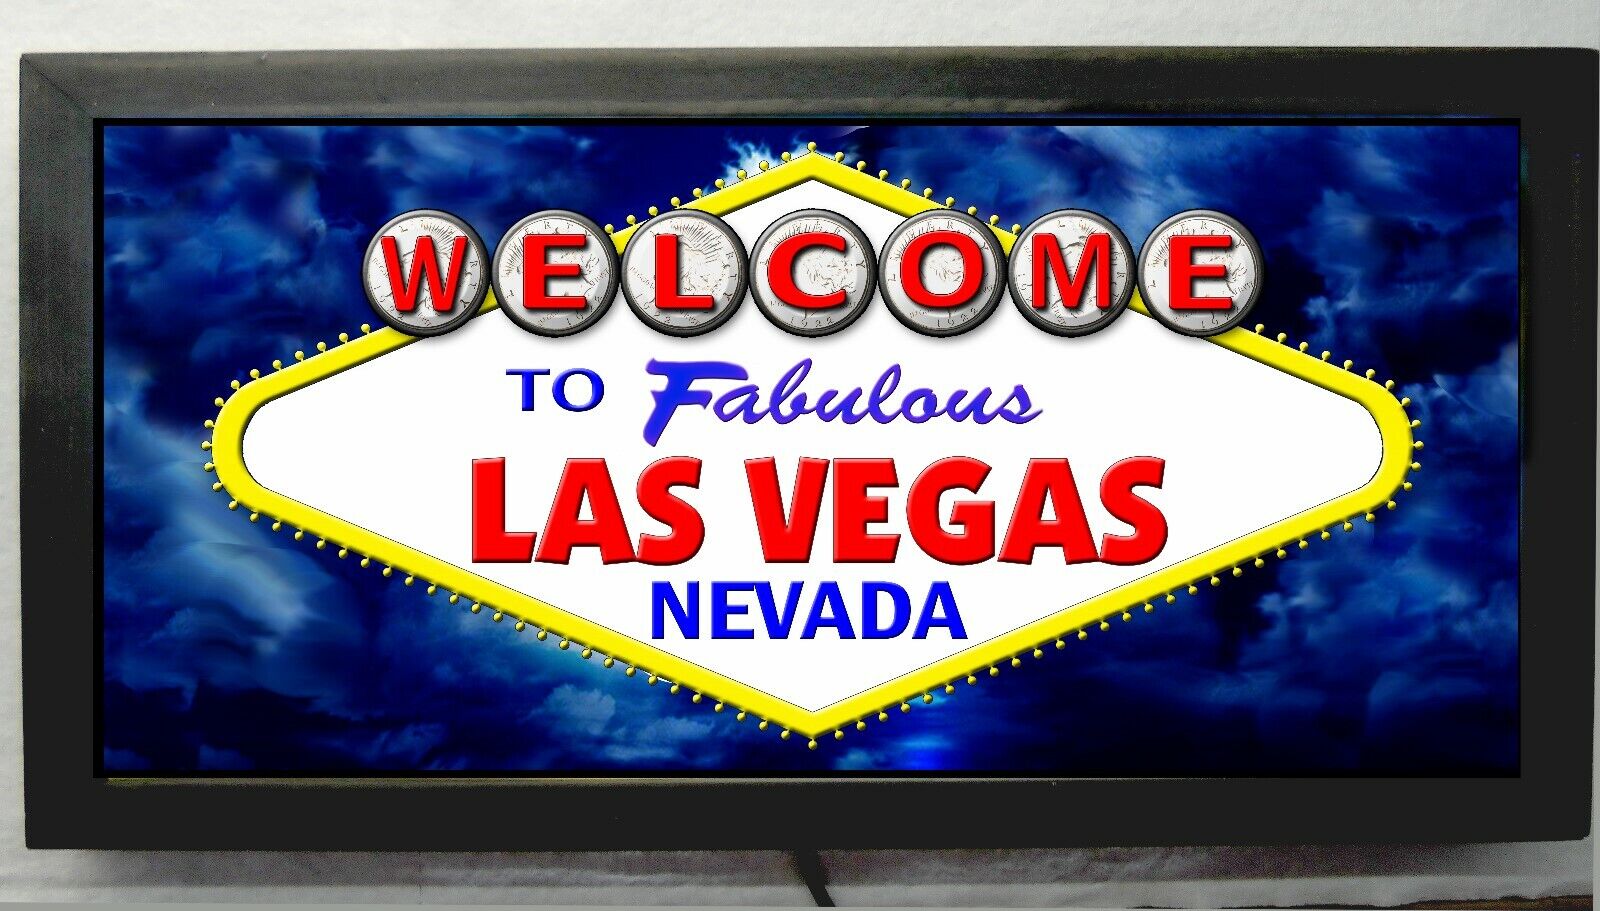 LED LIGHTED WELCOME TO FABULOUS LAS VEGAS SIGN CASINO SLOTS GAMBLING SIGN